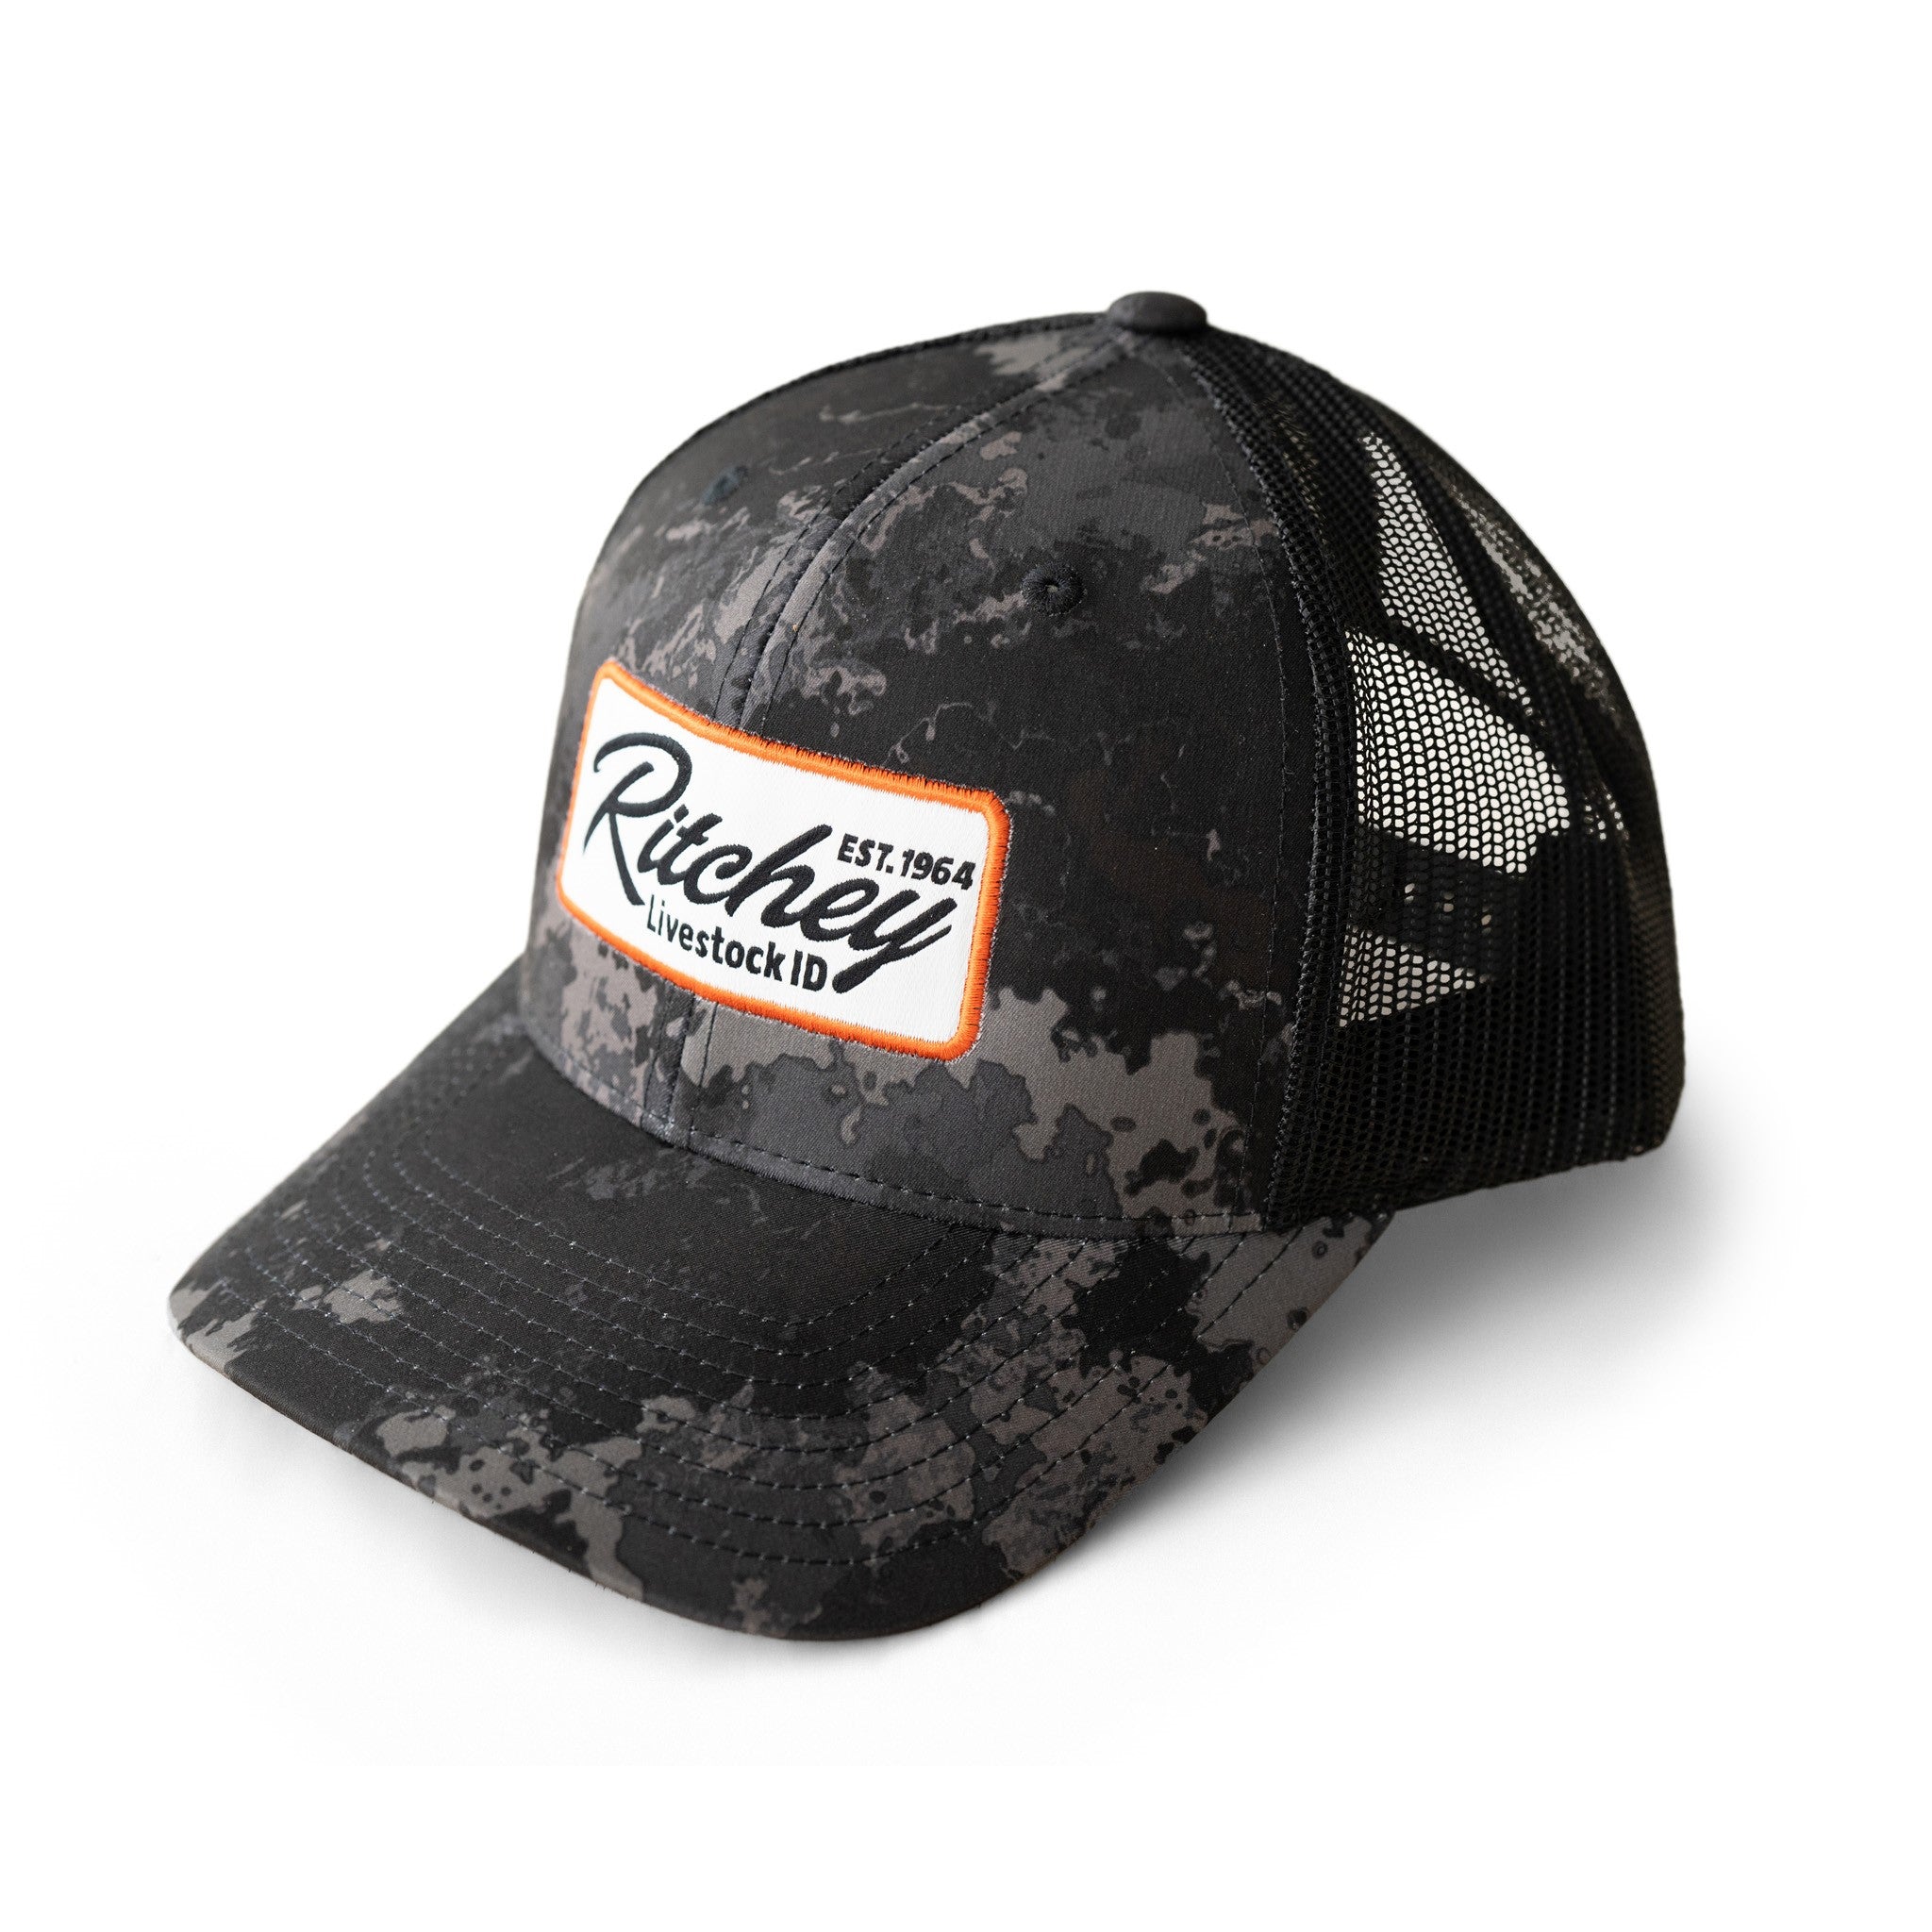 Trucker Hats for Cowboys & Cowgirls